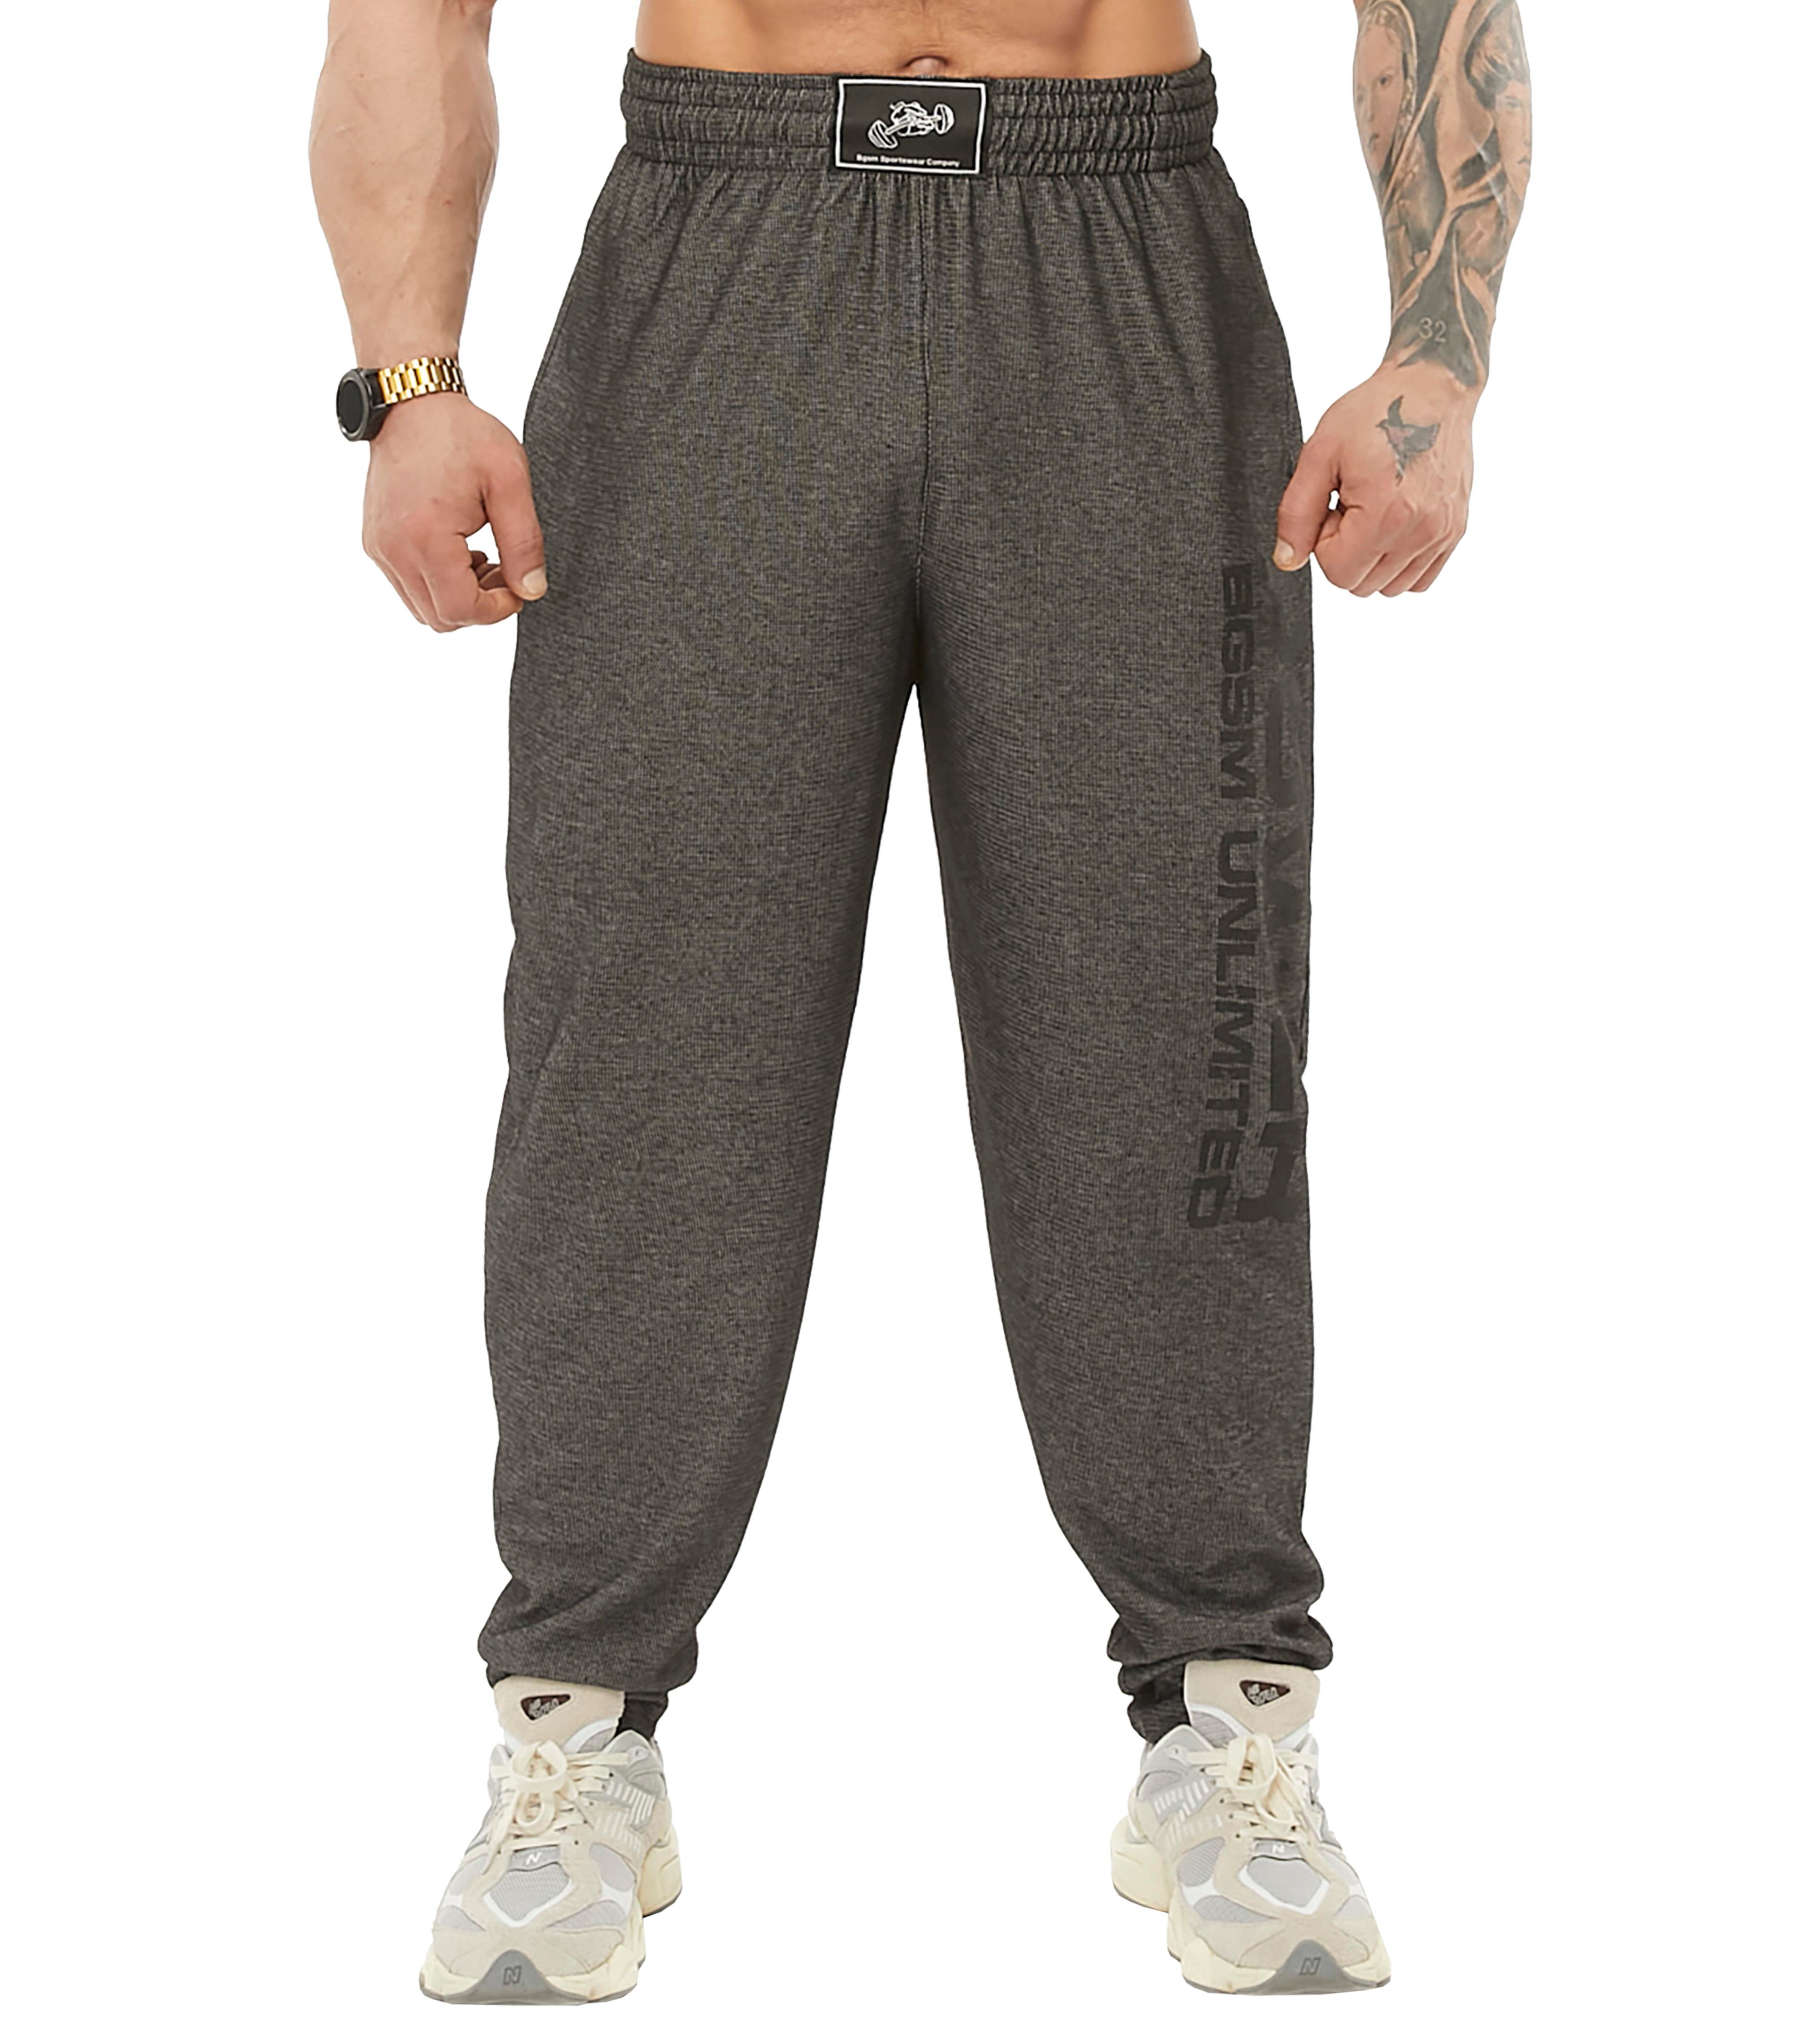 Men's Baggy Sweatpants With Pockets, Oldschool Loose Fit Gym